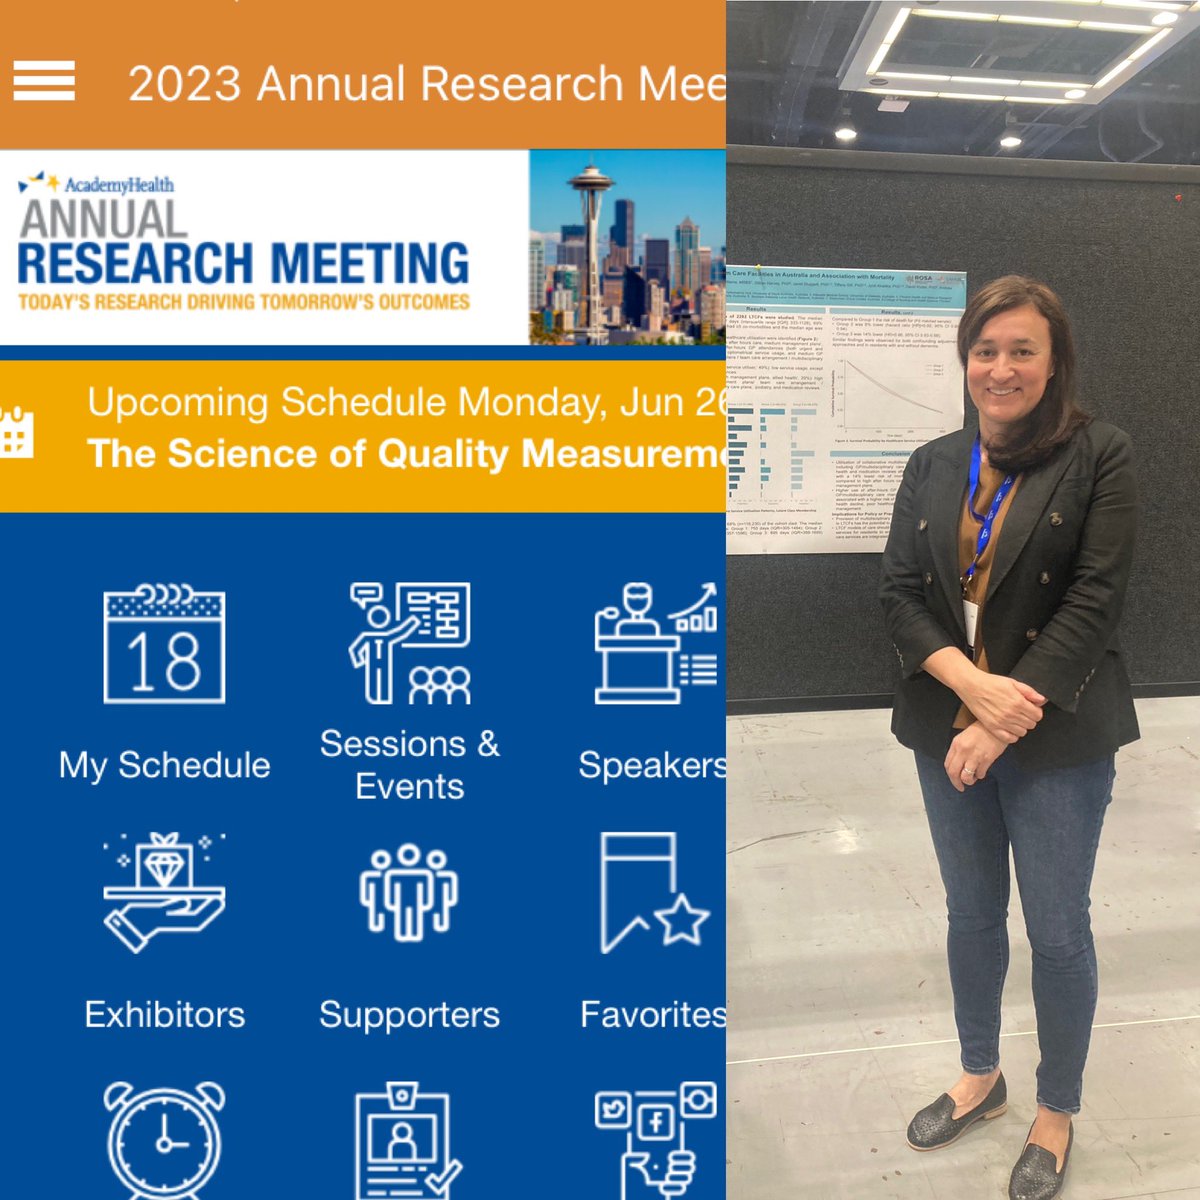 What an inspiring few days at #ARM23  Nothing like hearing the experts talk abt quality and safety measurement to my heart’s content.
And presenting some work from the @ROSA_Project while I’m at it🇦🇺